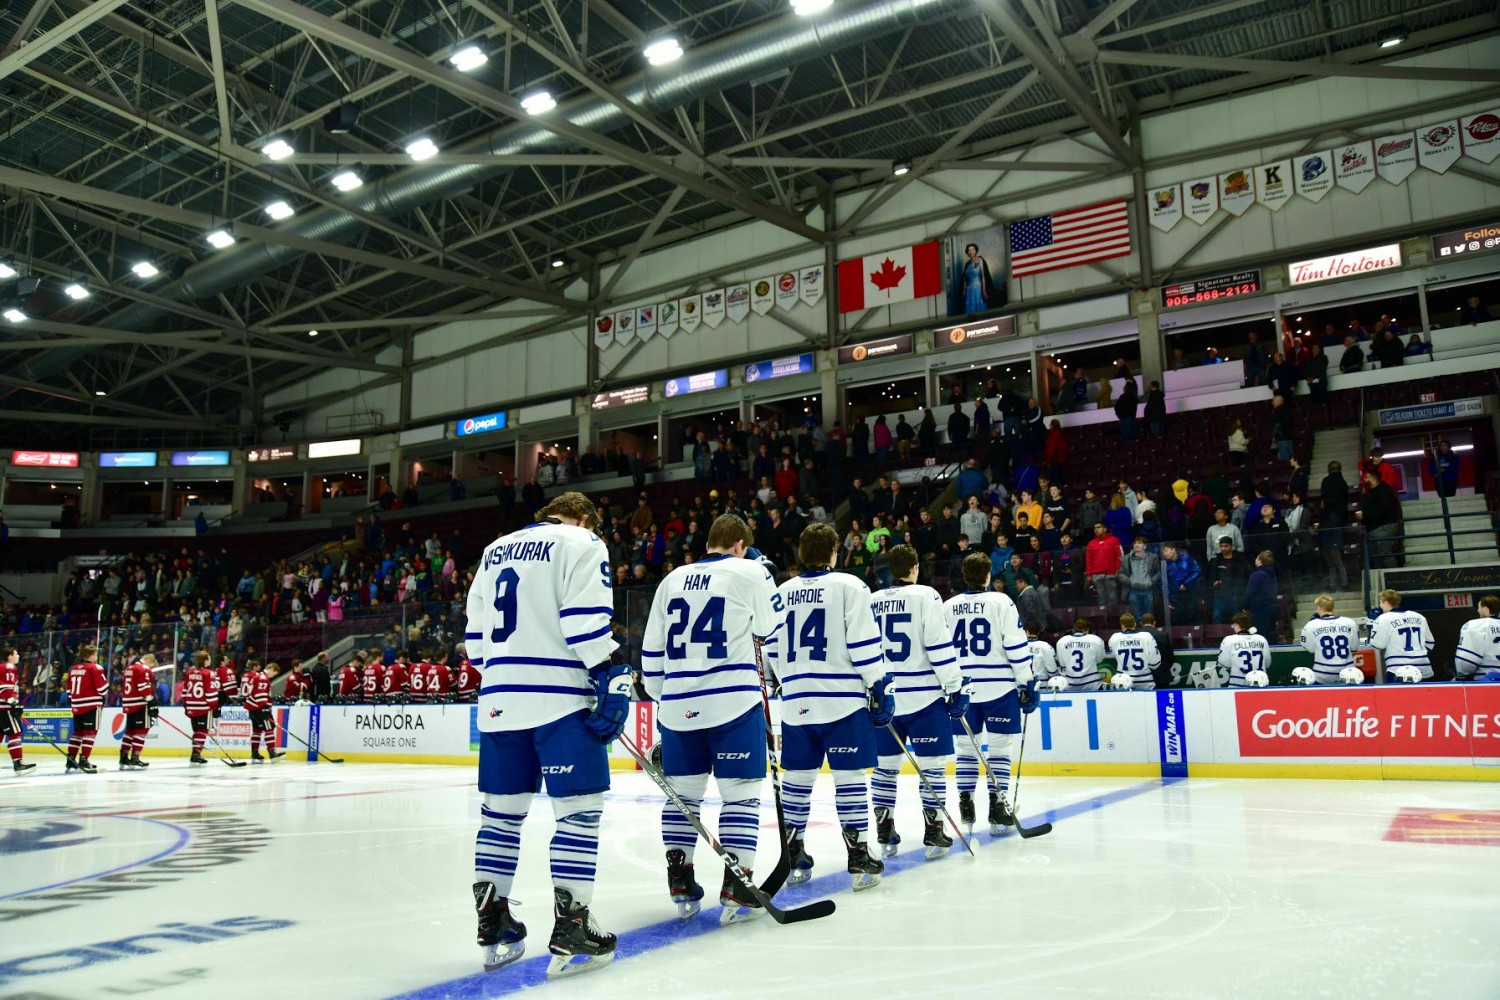 The OHL Arena Guide - Paramount Centre, Mississauga Steelheads